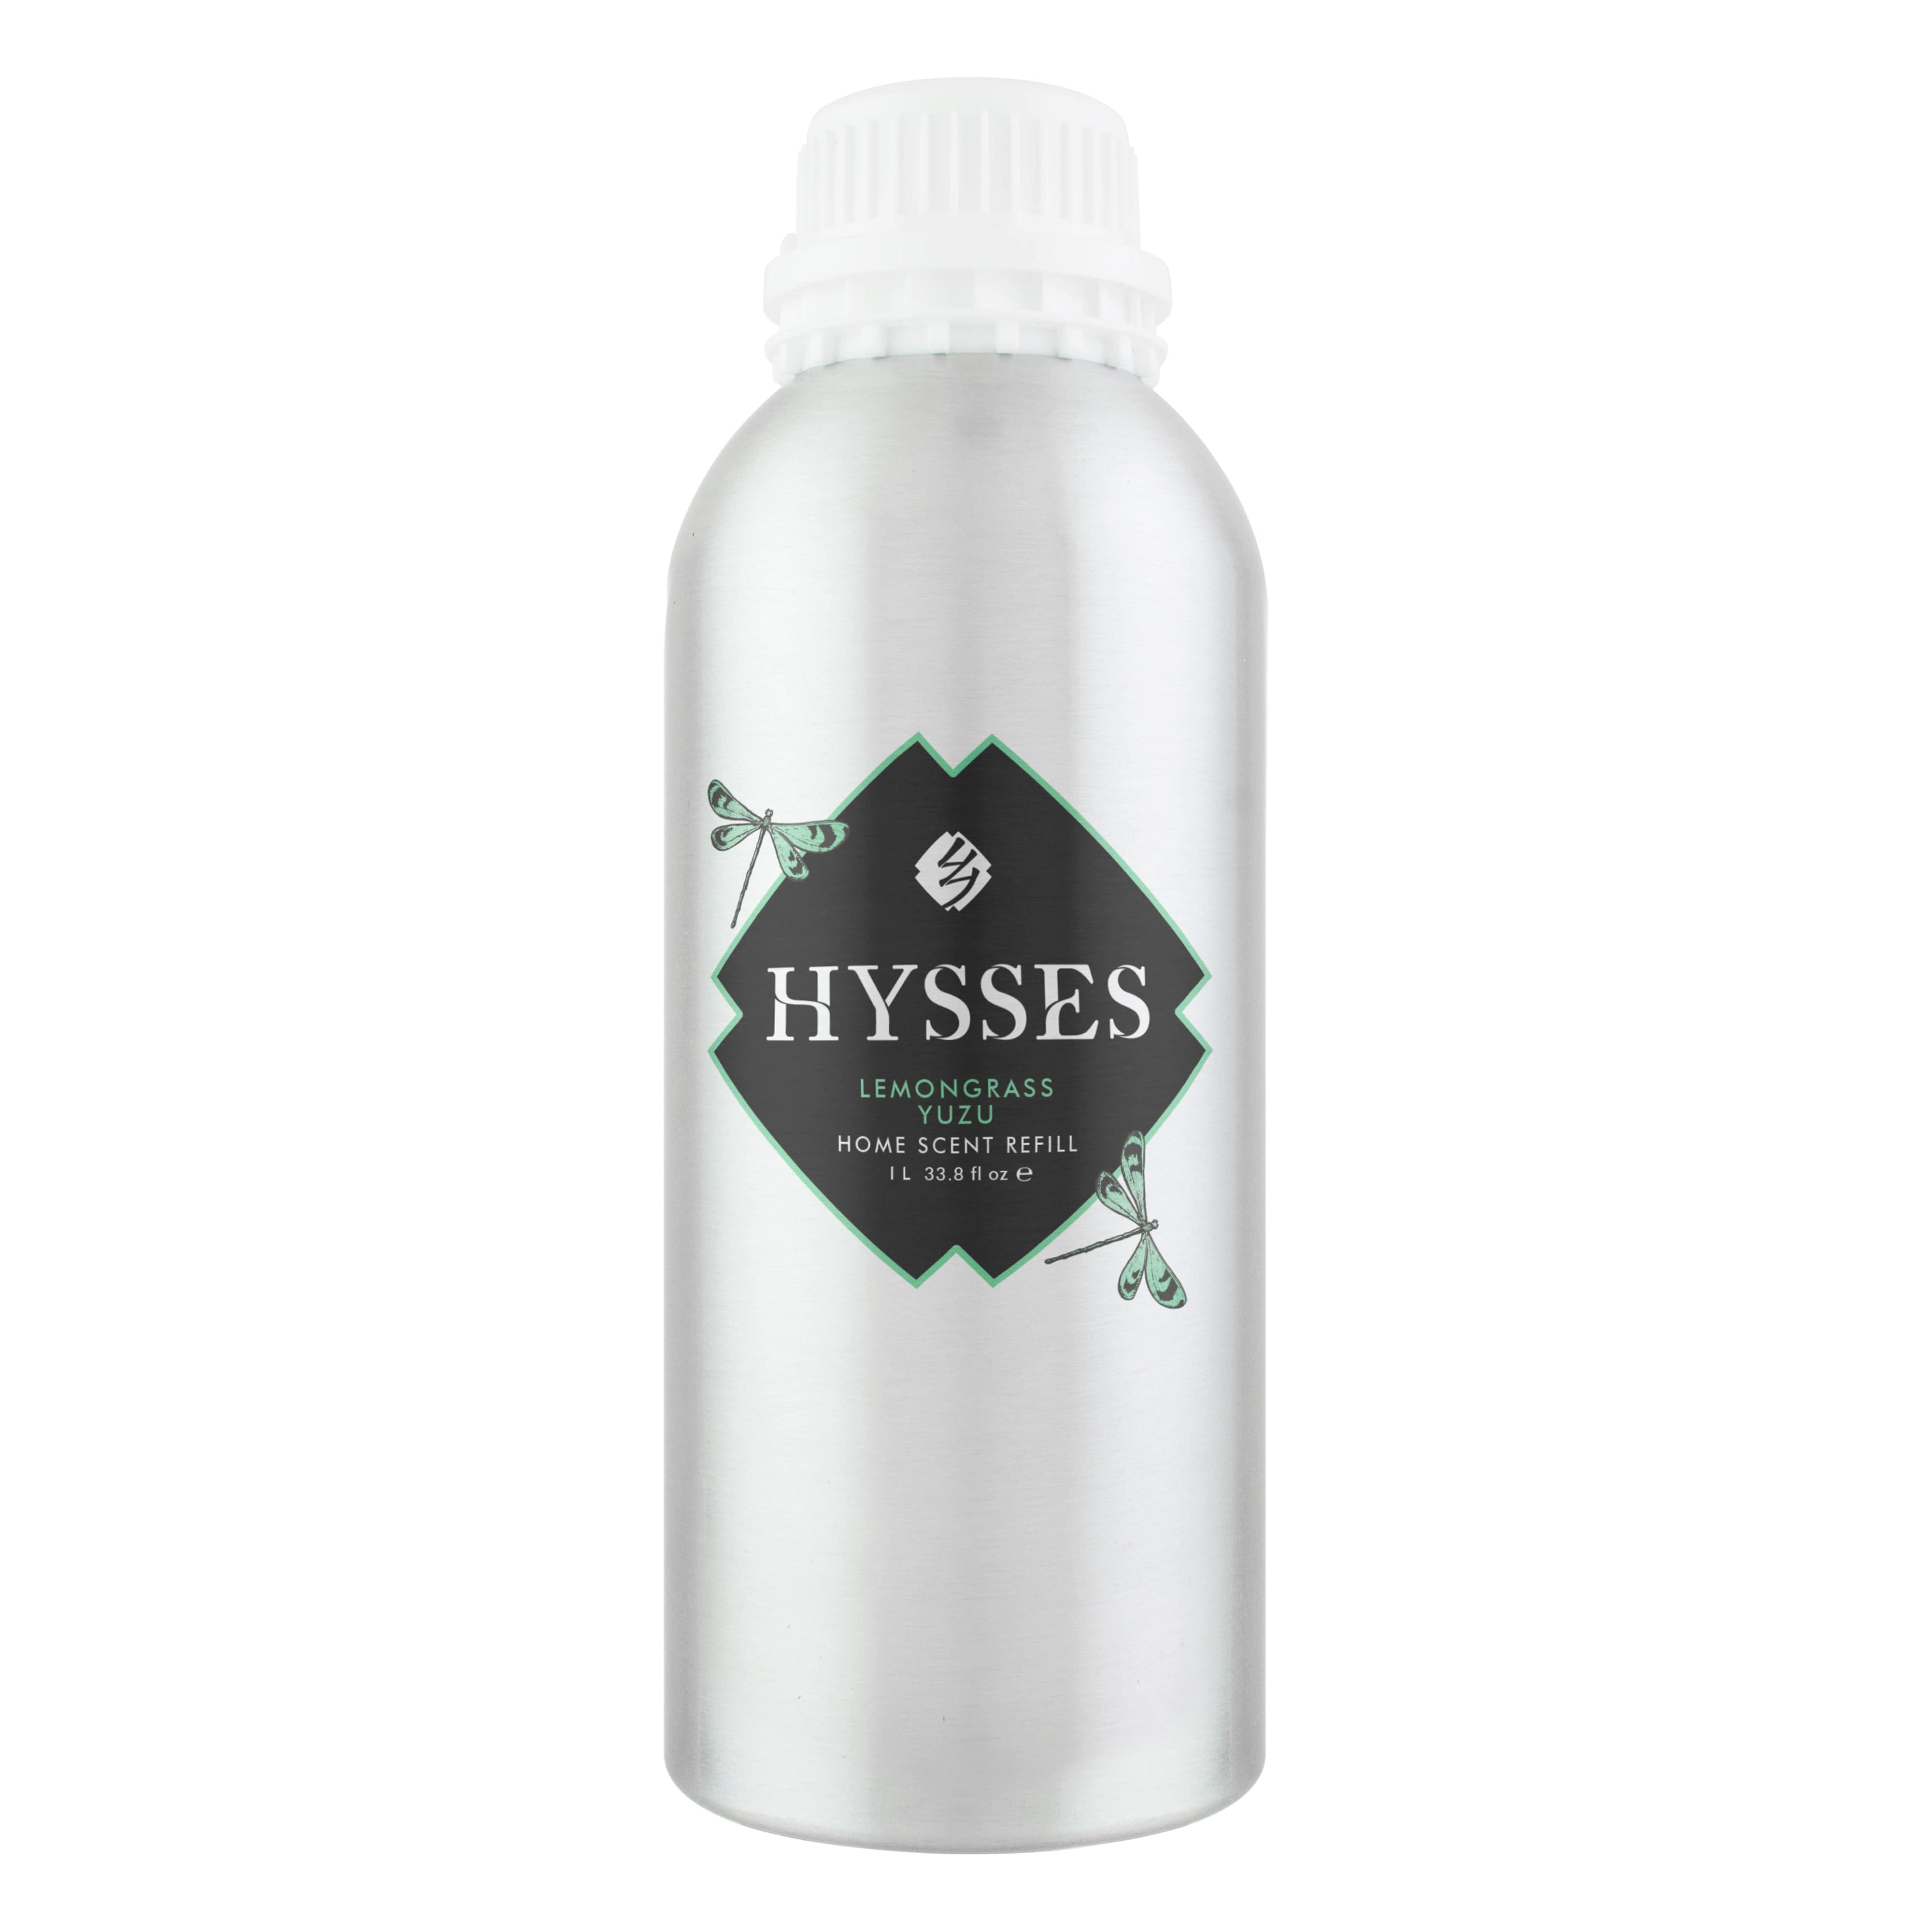 Hysses Home Scents 1000ml Refill Home Scent Reed Diffuser Lemongrass Yuzu